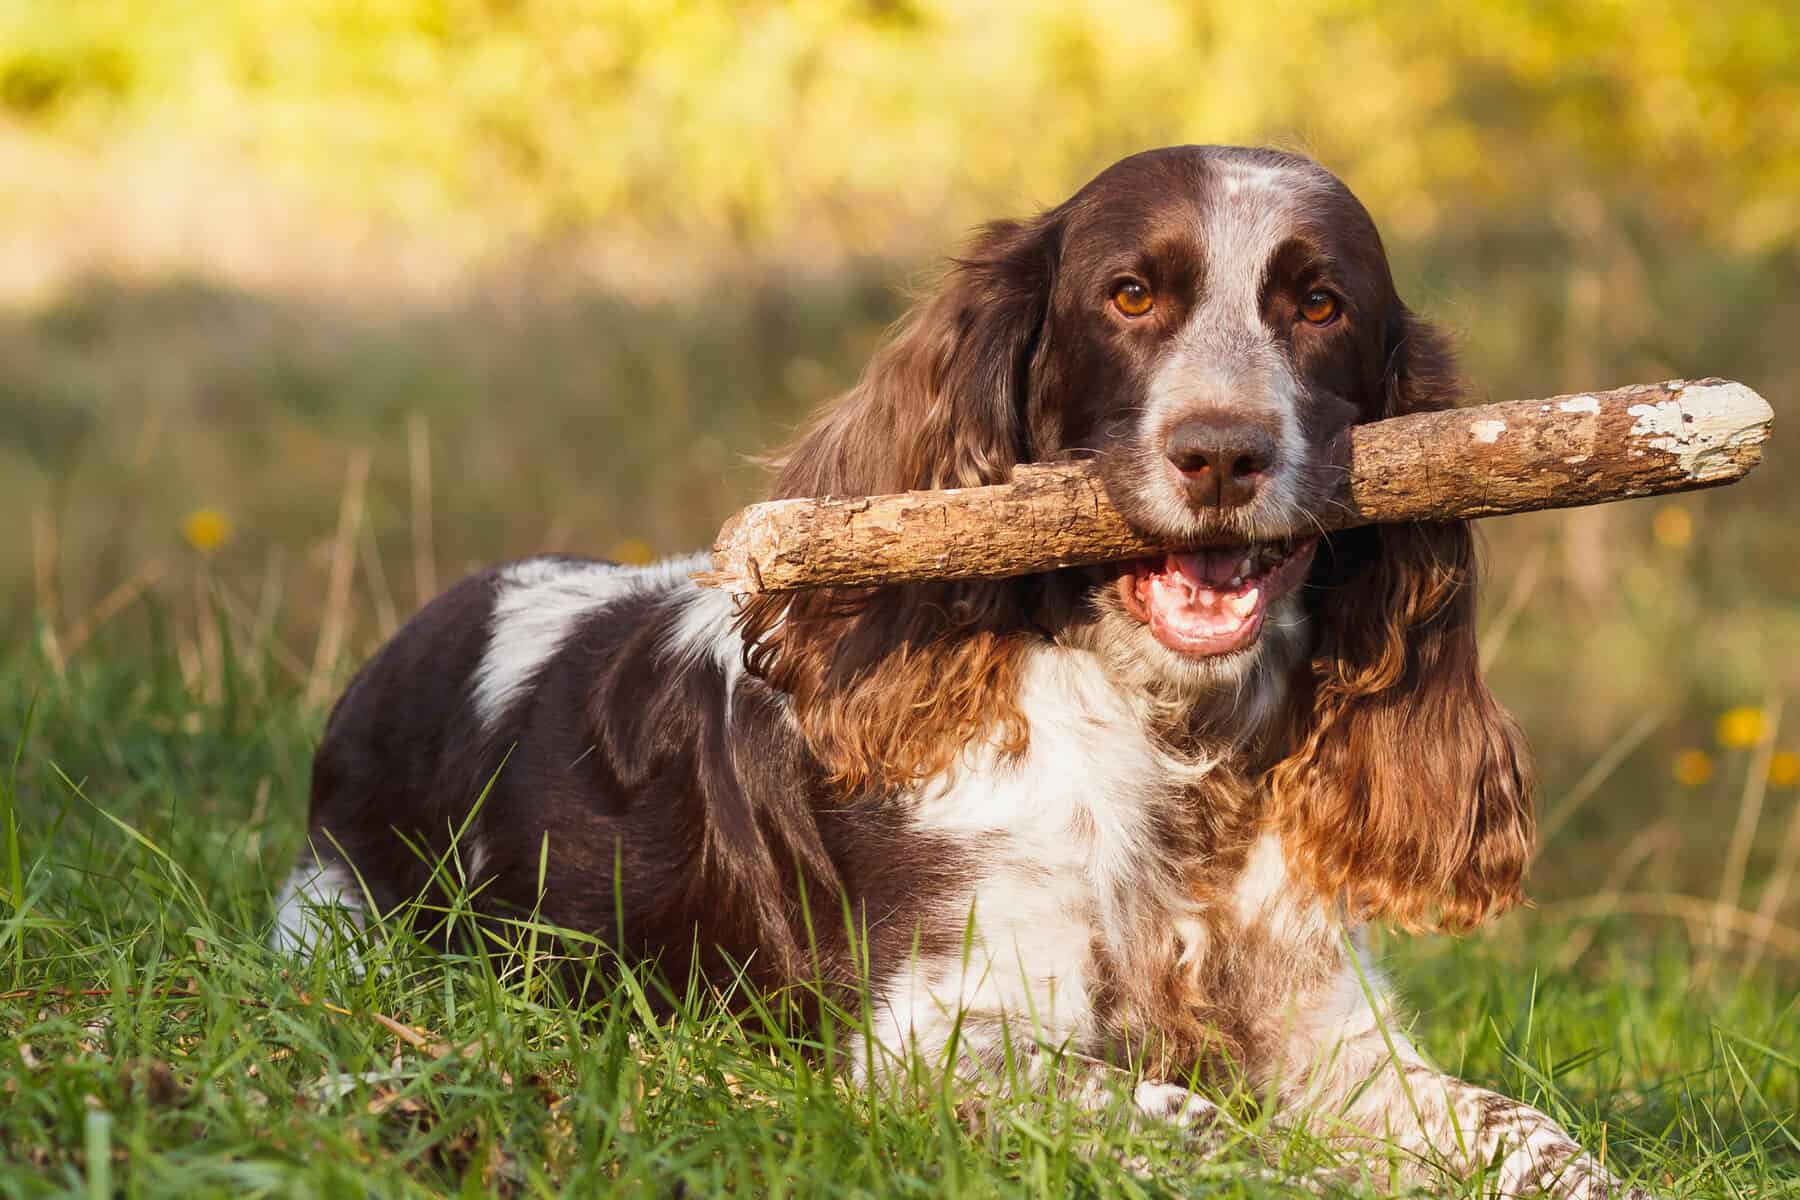 Home Dog Training of North Georgia trains Springier Spaniels as well as all dog breeds. We have had two Springier Spaniels with two different personalities and training requirements